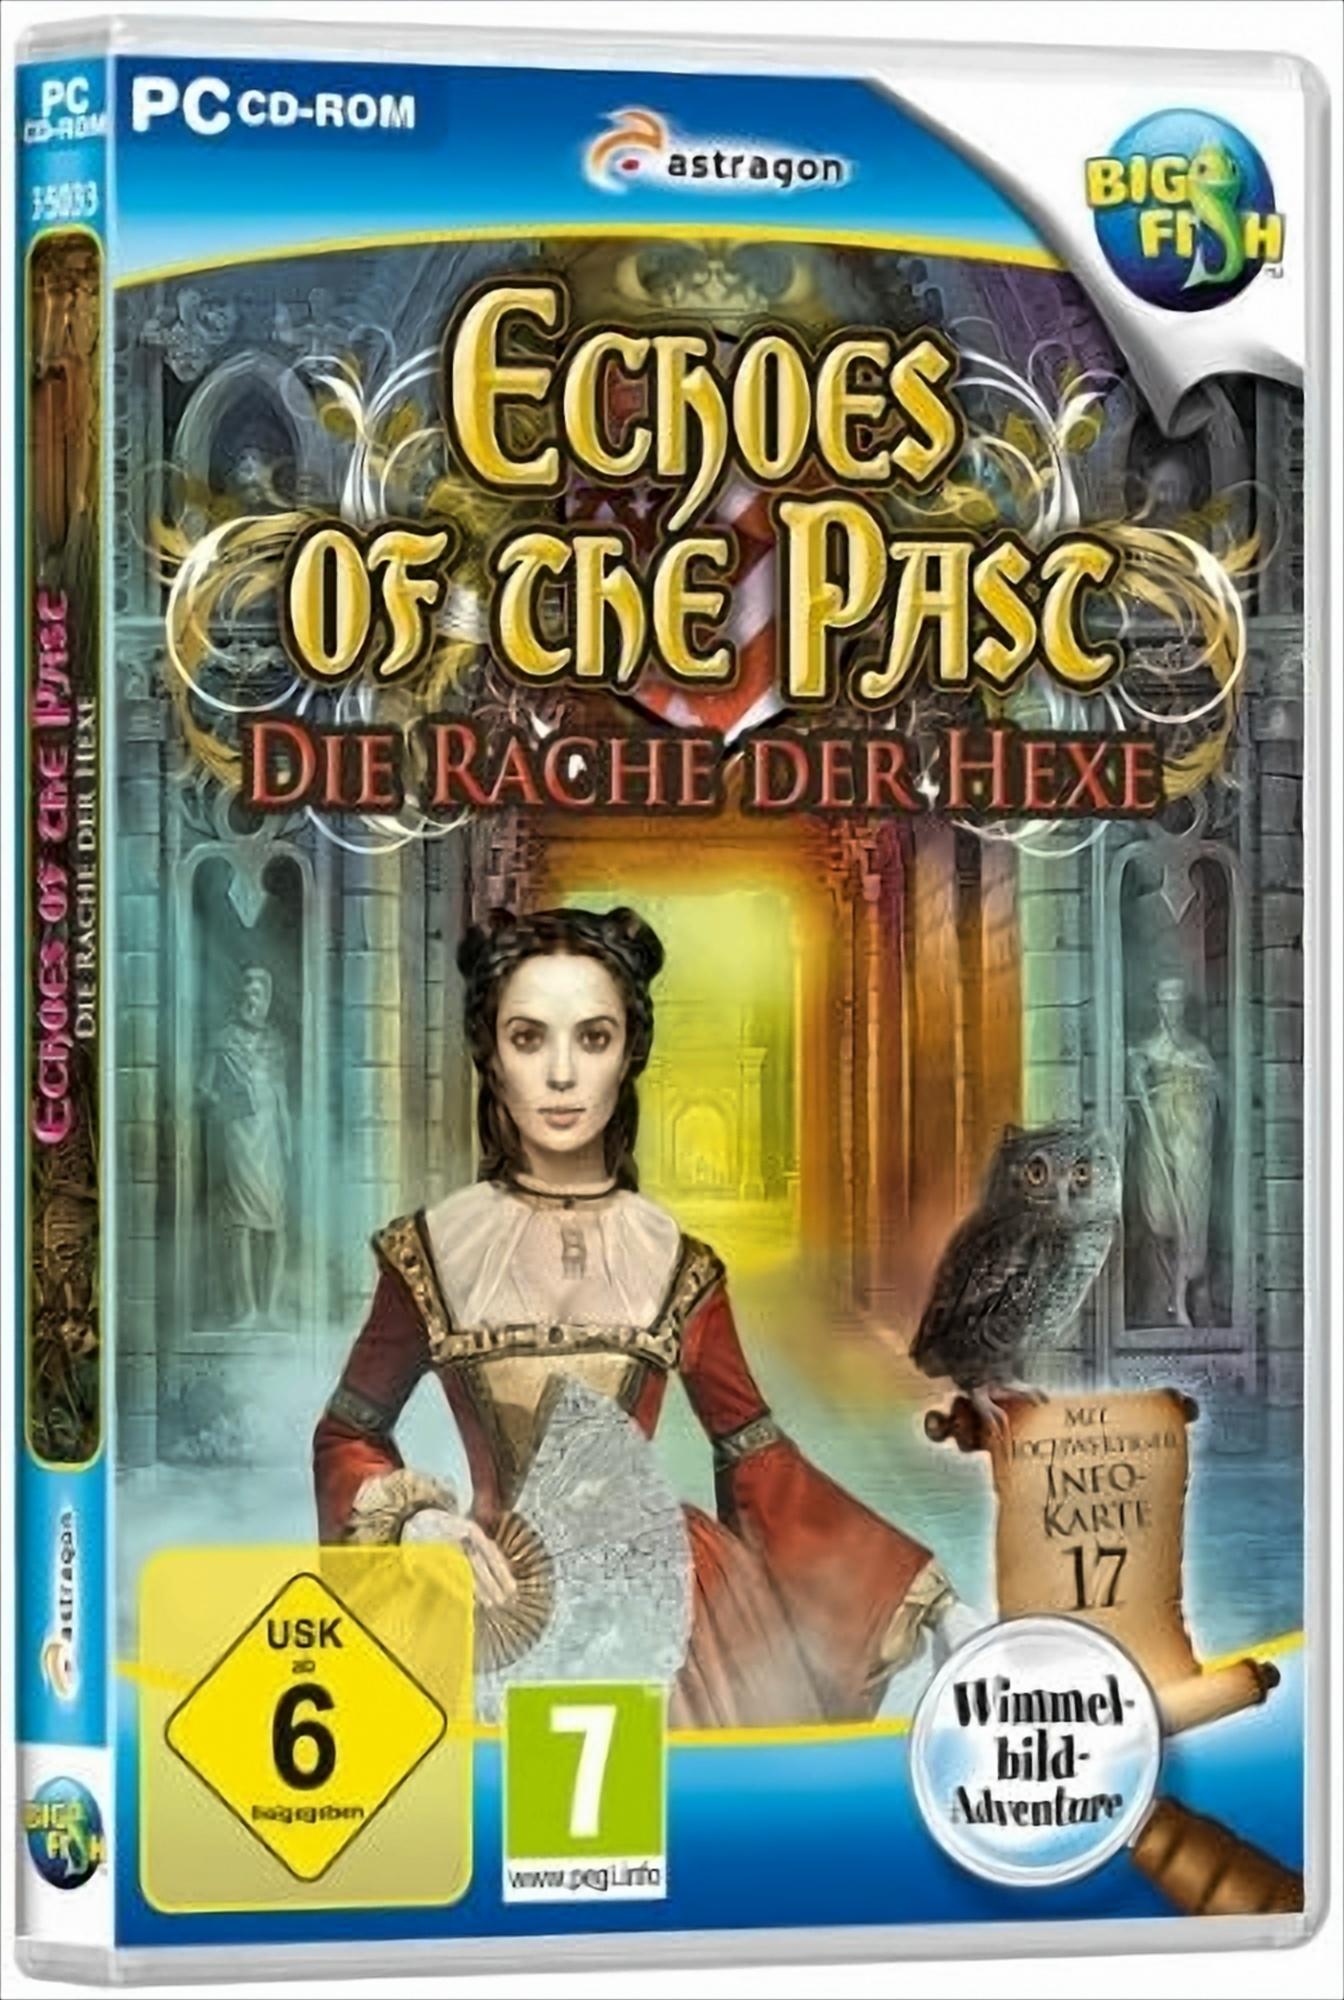 Of - The Die Past: Hexe Echoes Rache [PC] der